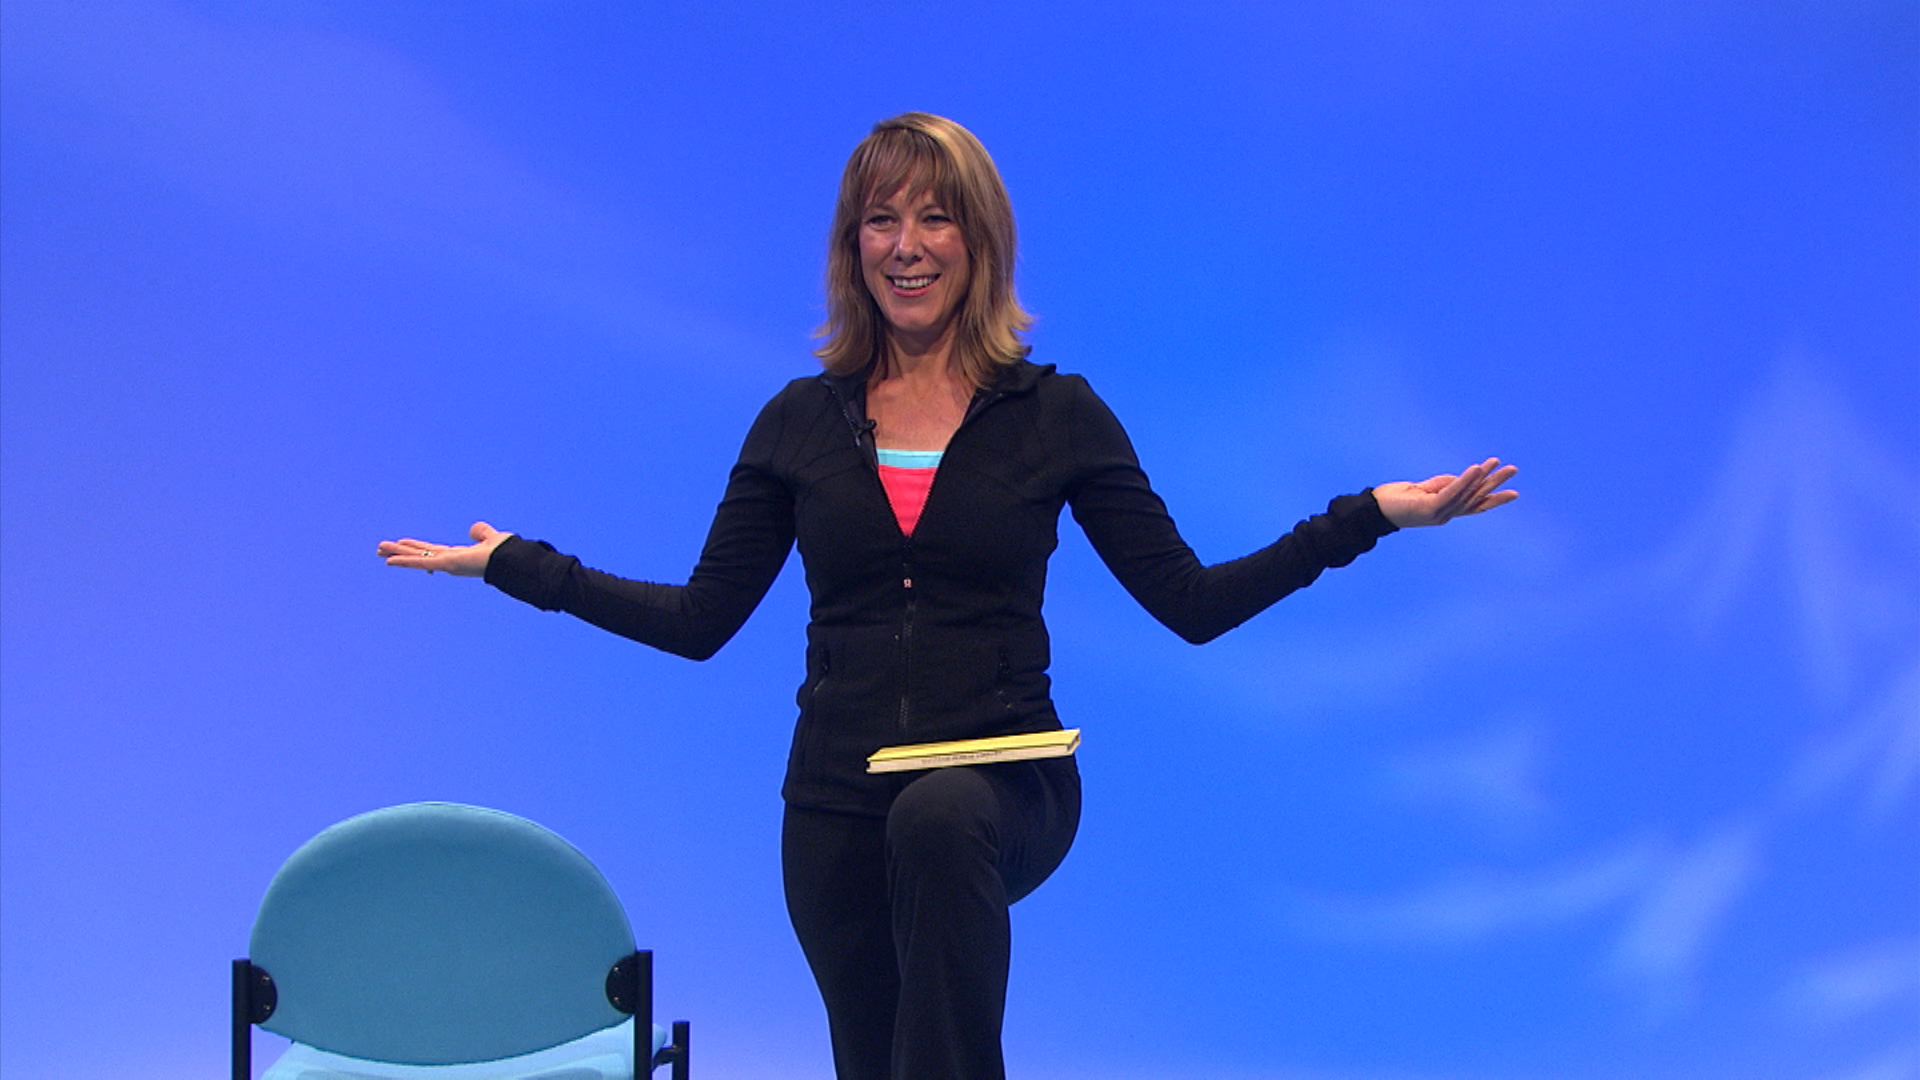 Gretchen from the TV series Sit and Be Fit shares balance exercises